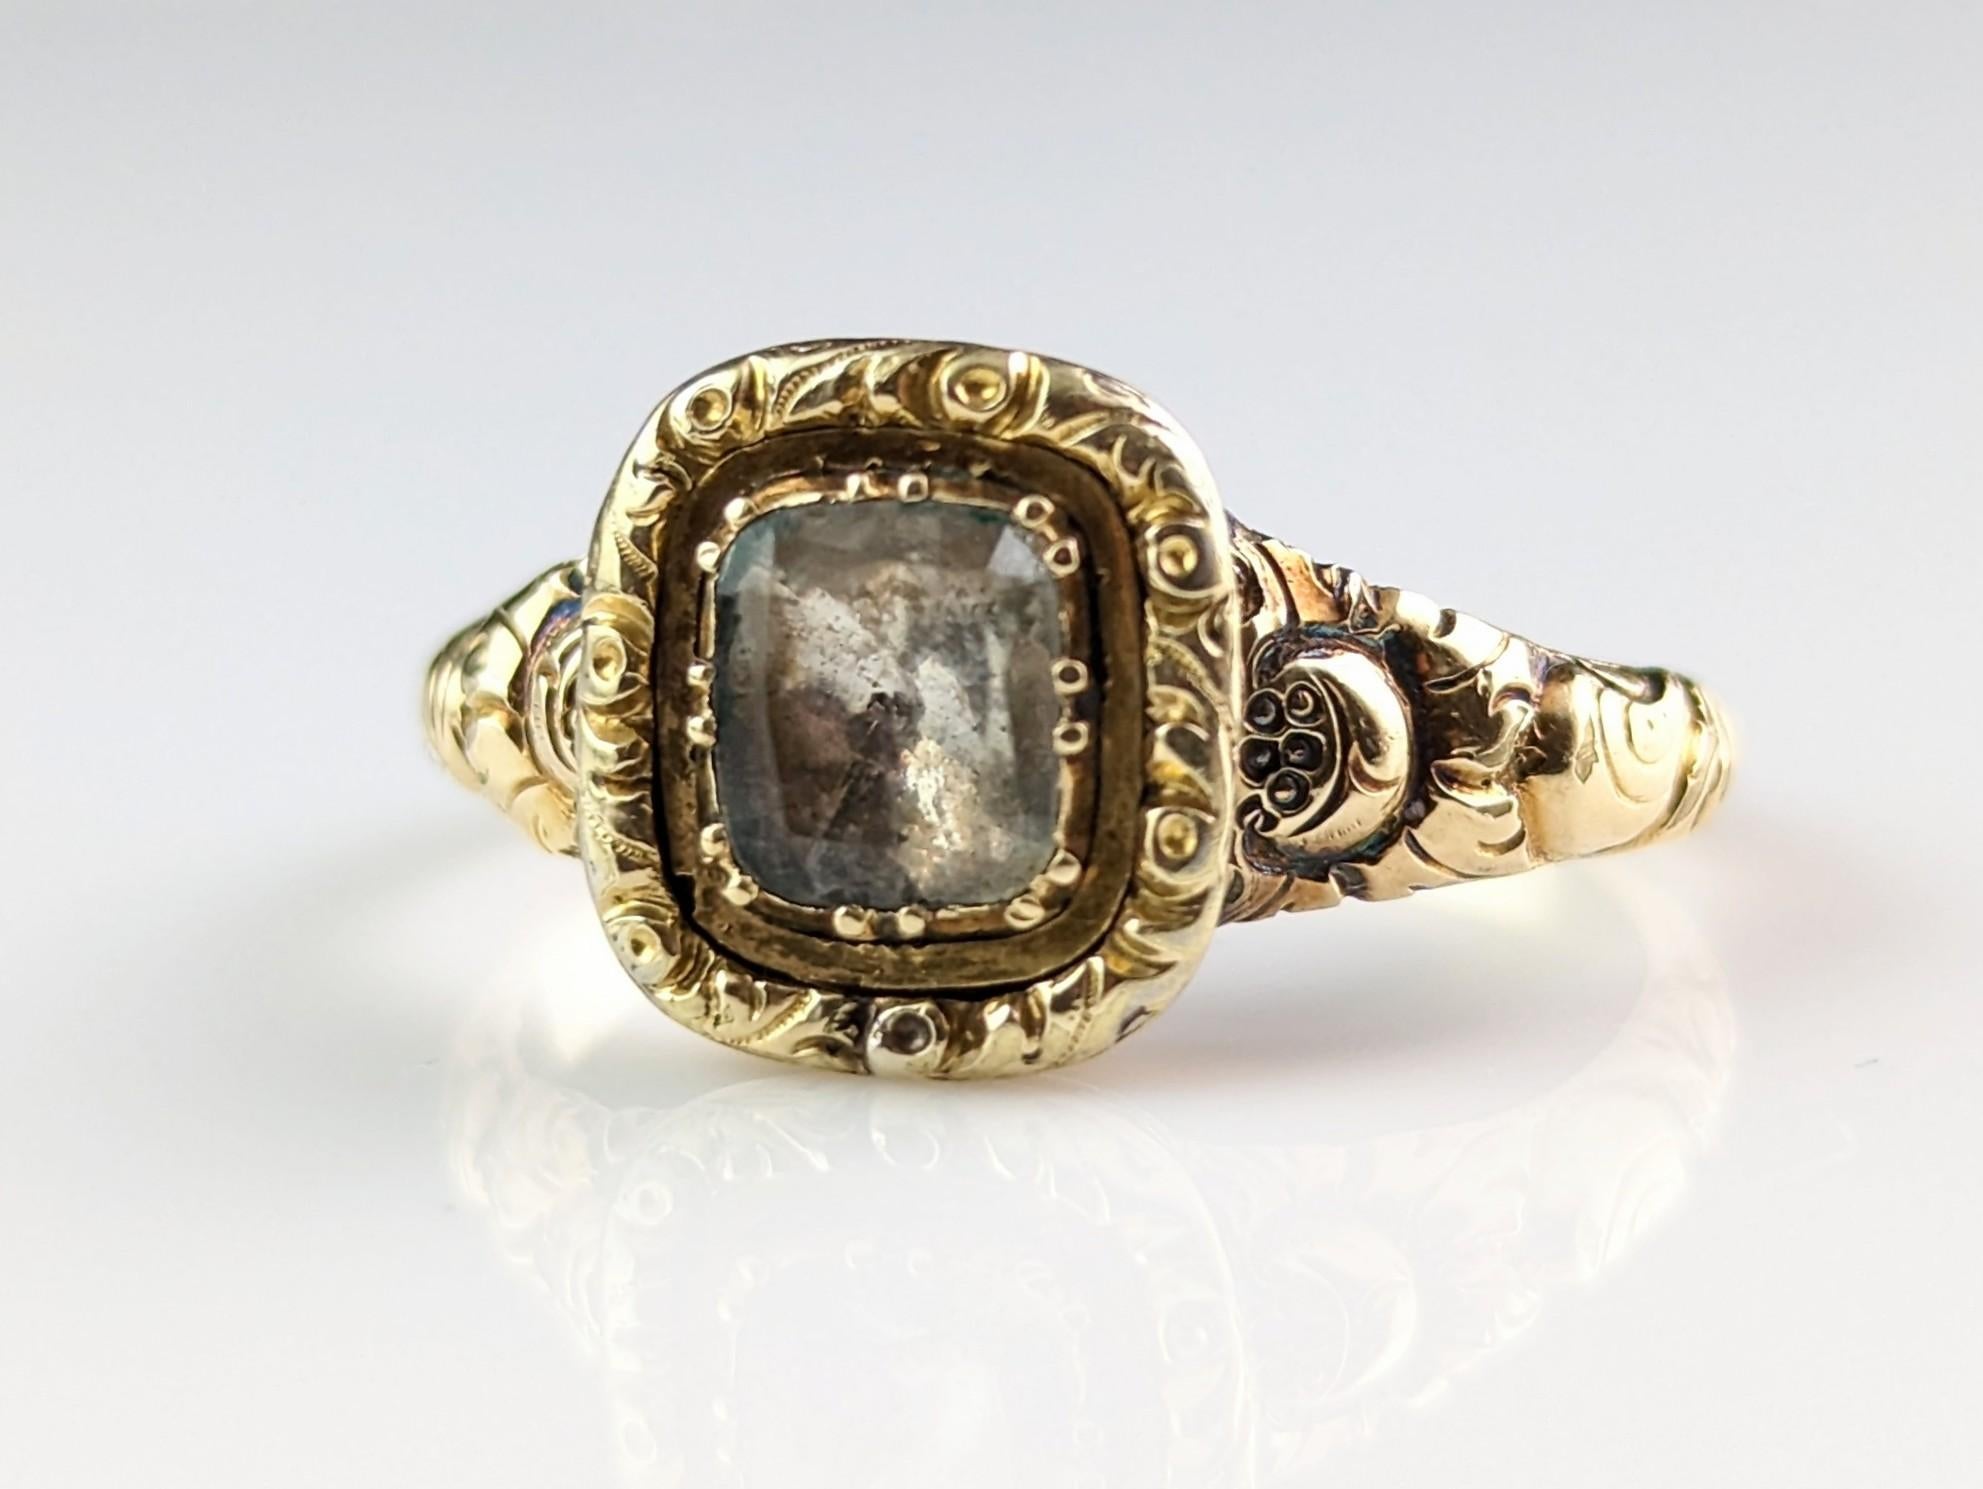 Antique Georgian Foiled Quartz Ring, 12k Gold, Chase and Engraved 11